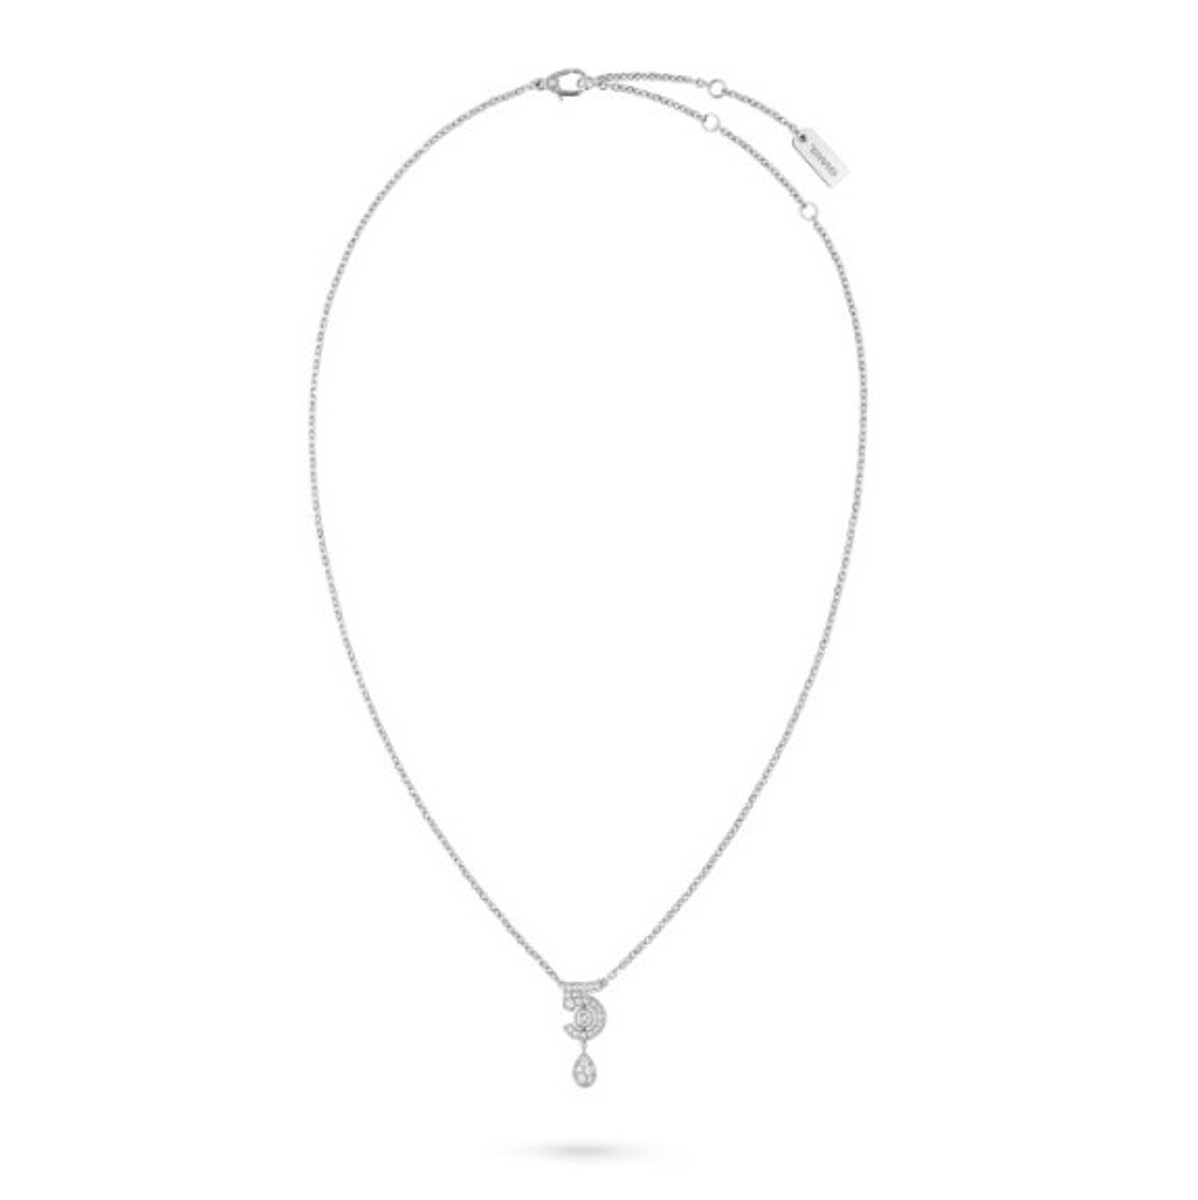 CHANEL Eternal N°5 Necklace-53439 Product Image